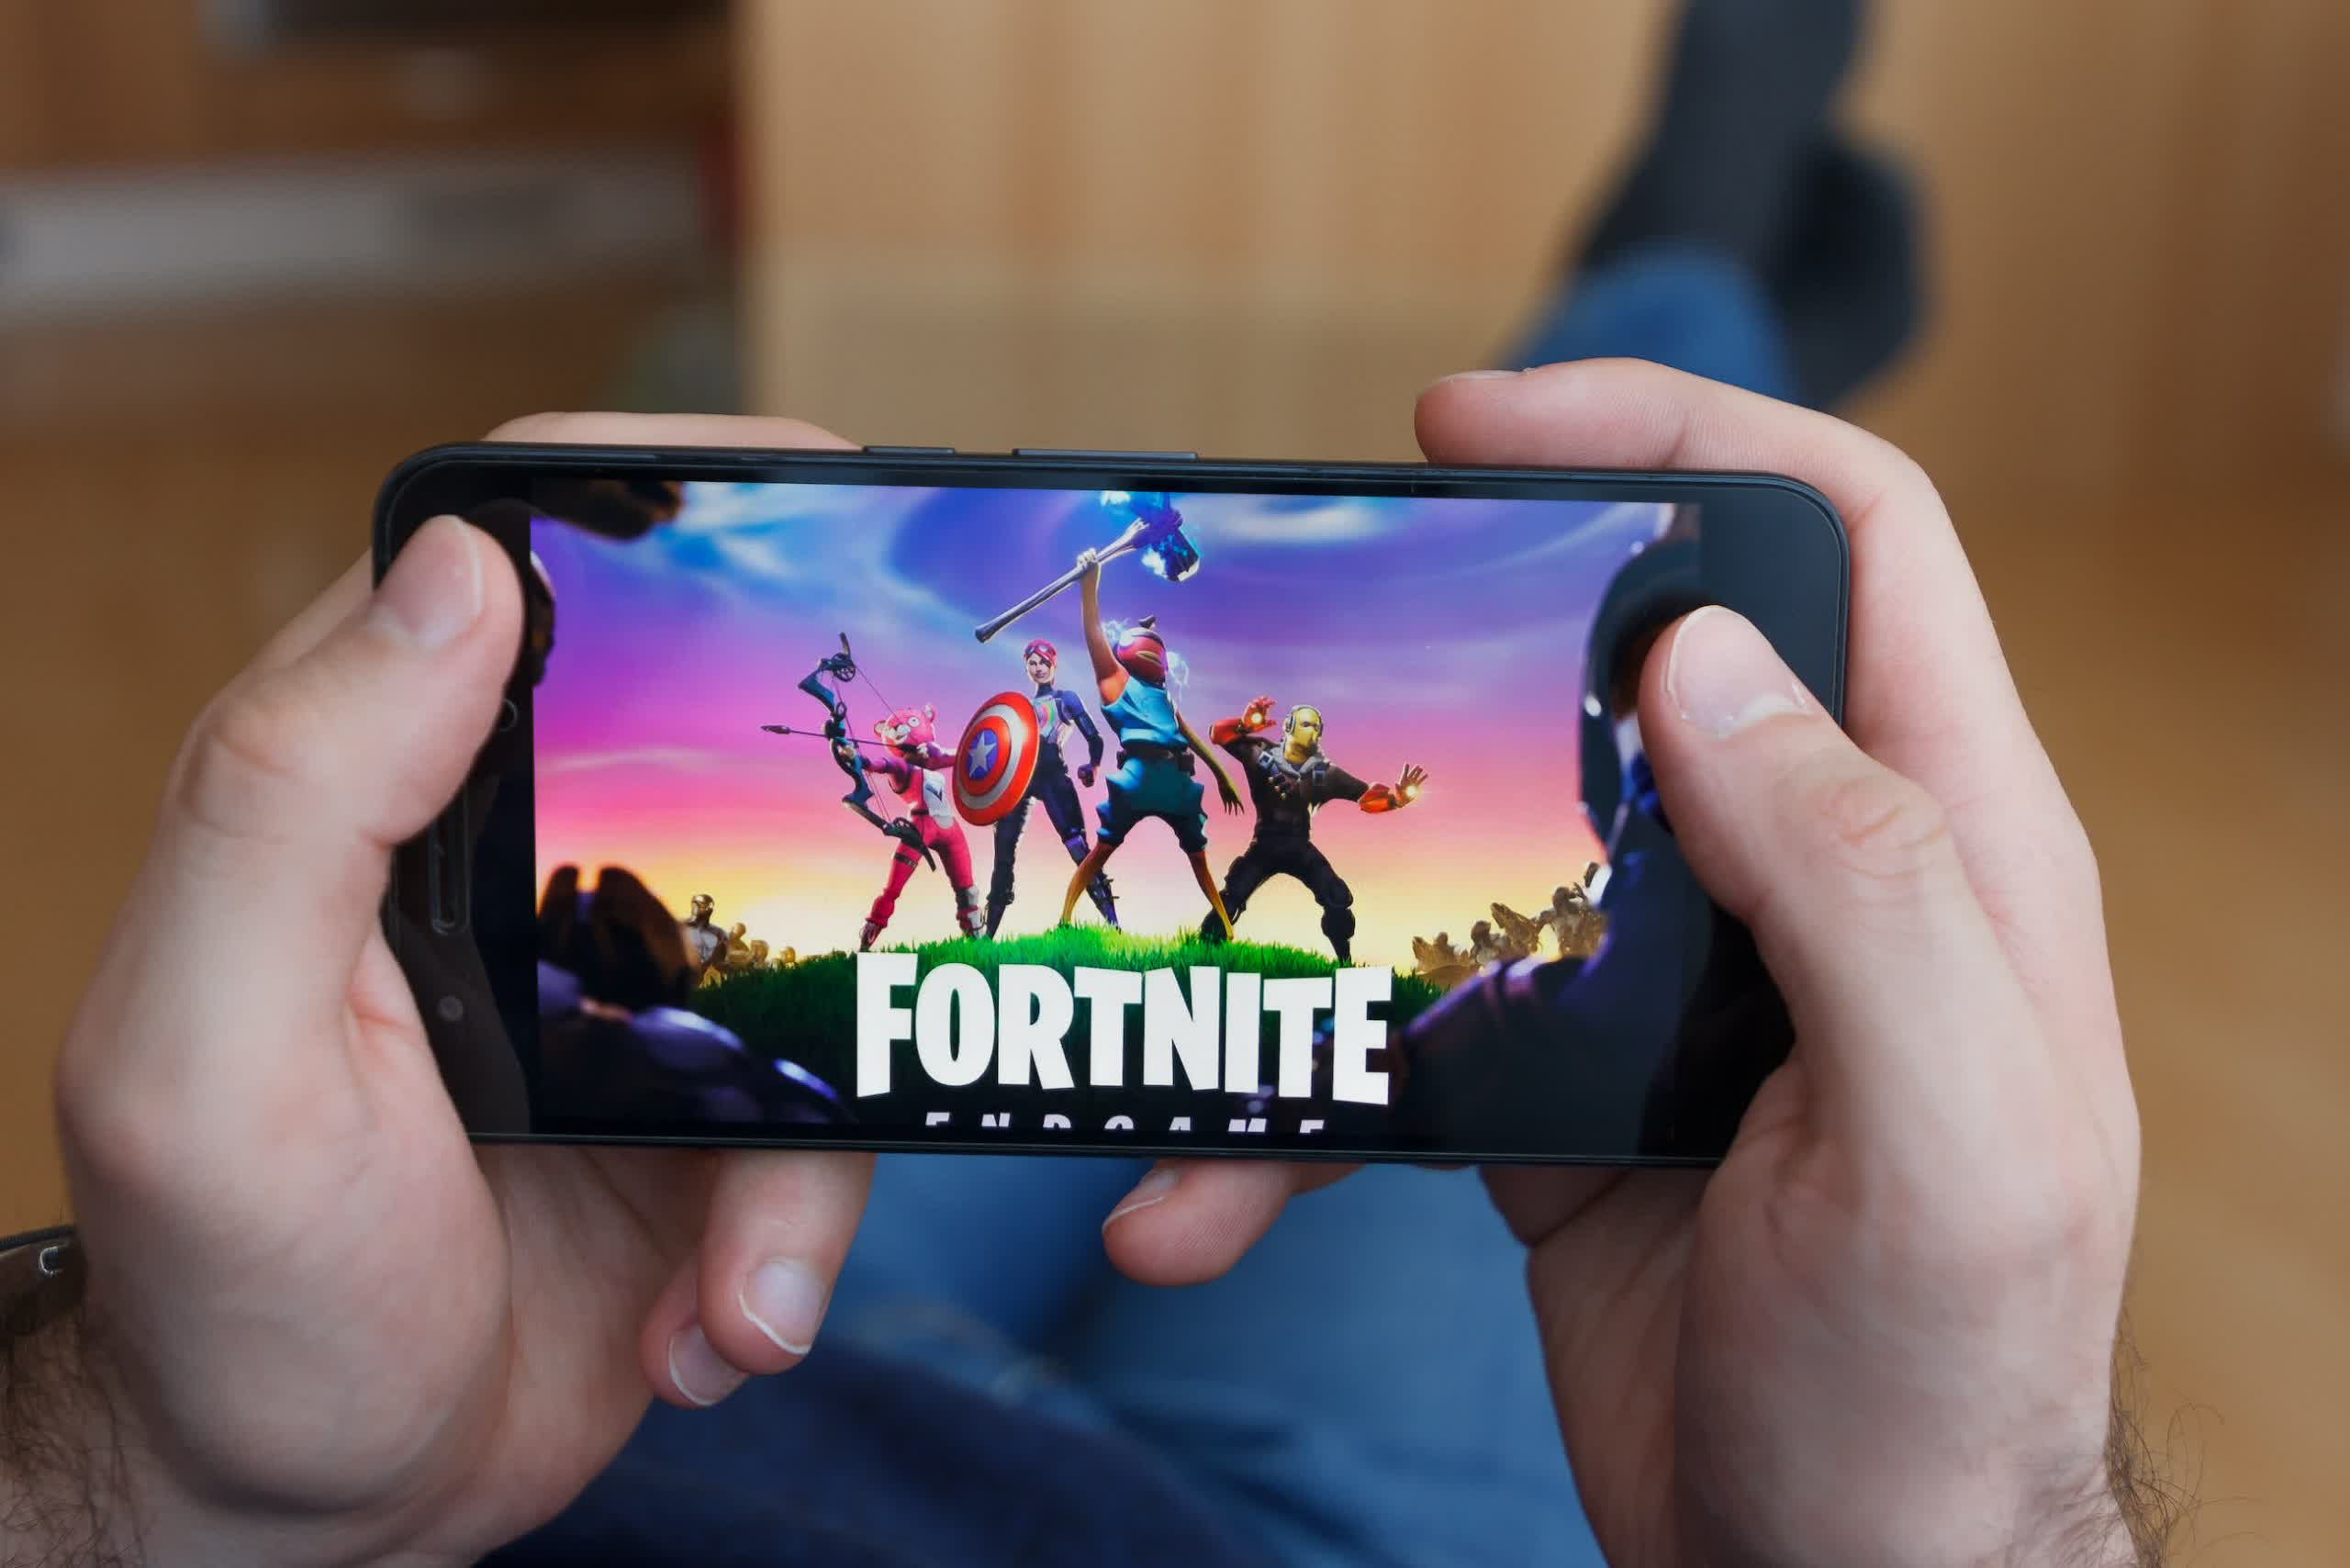 Fortnite will reportedly return to iPhones via Nvidia's GeForce Now web client